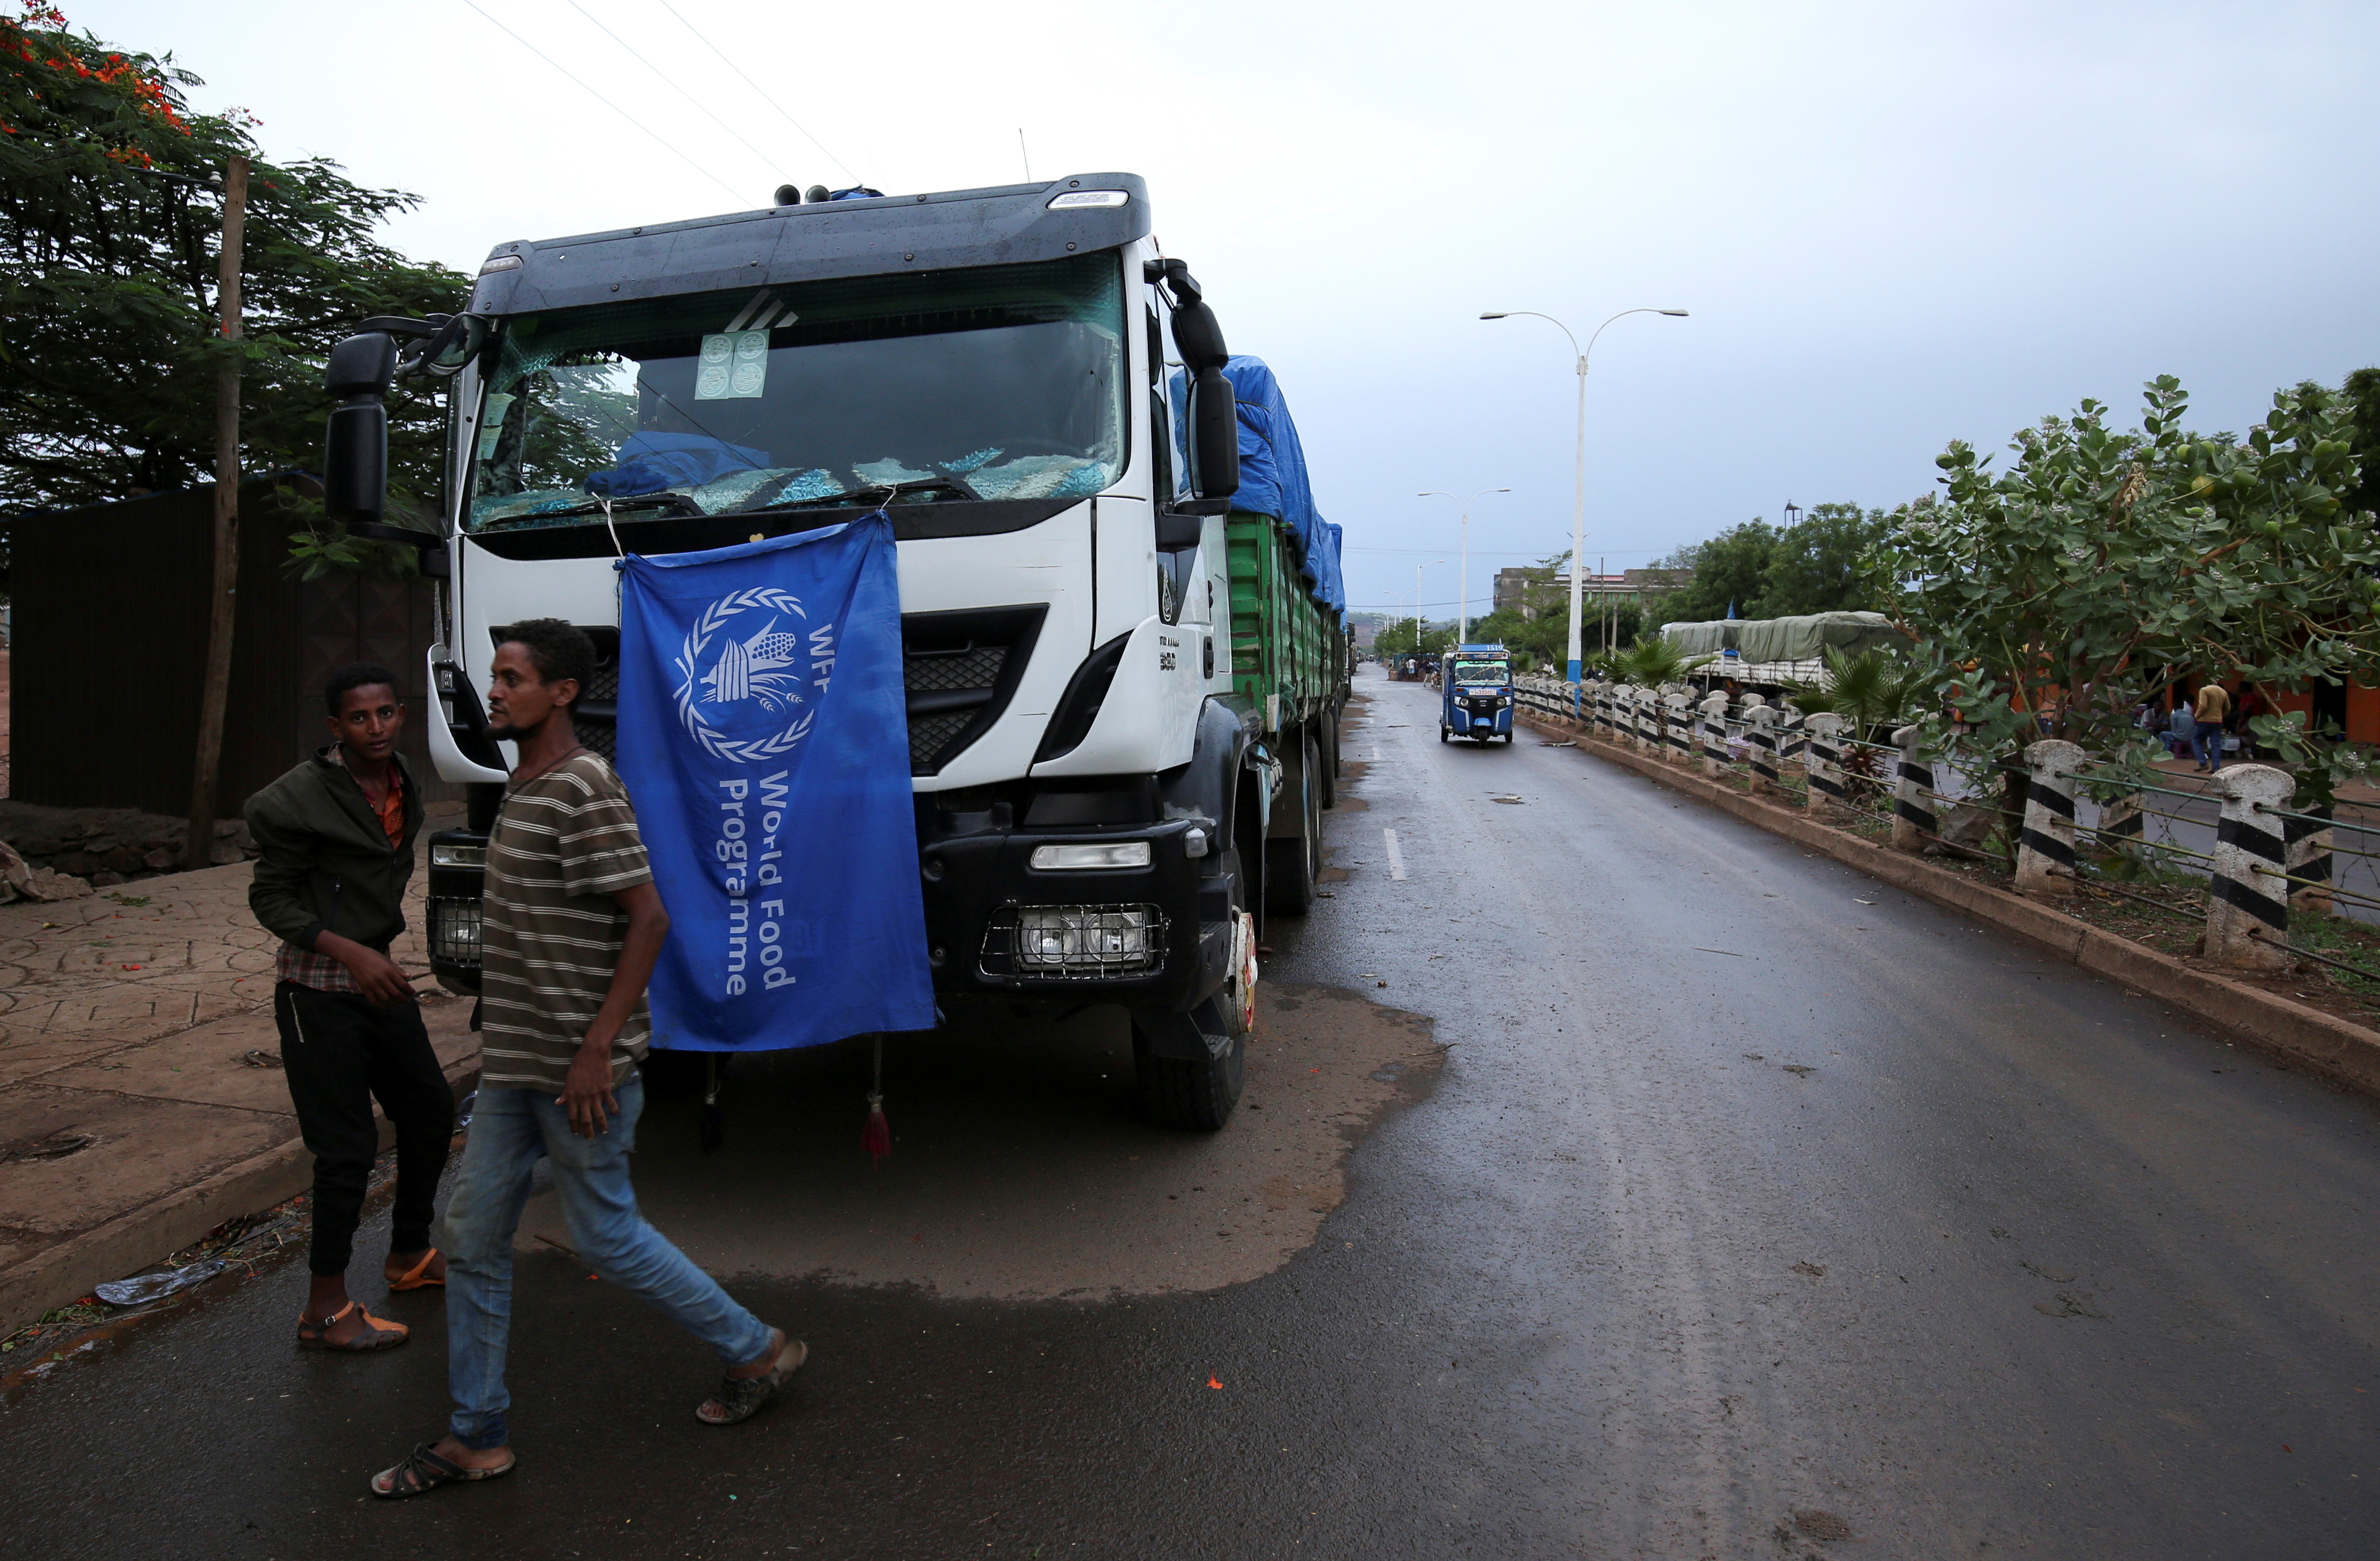 The World Food Program (WFP) convoy trucks carrying food items for the victims of Tigray war are seen parked after the checkpoints leading to Tigray Region were closed, in Mai Tsebri town